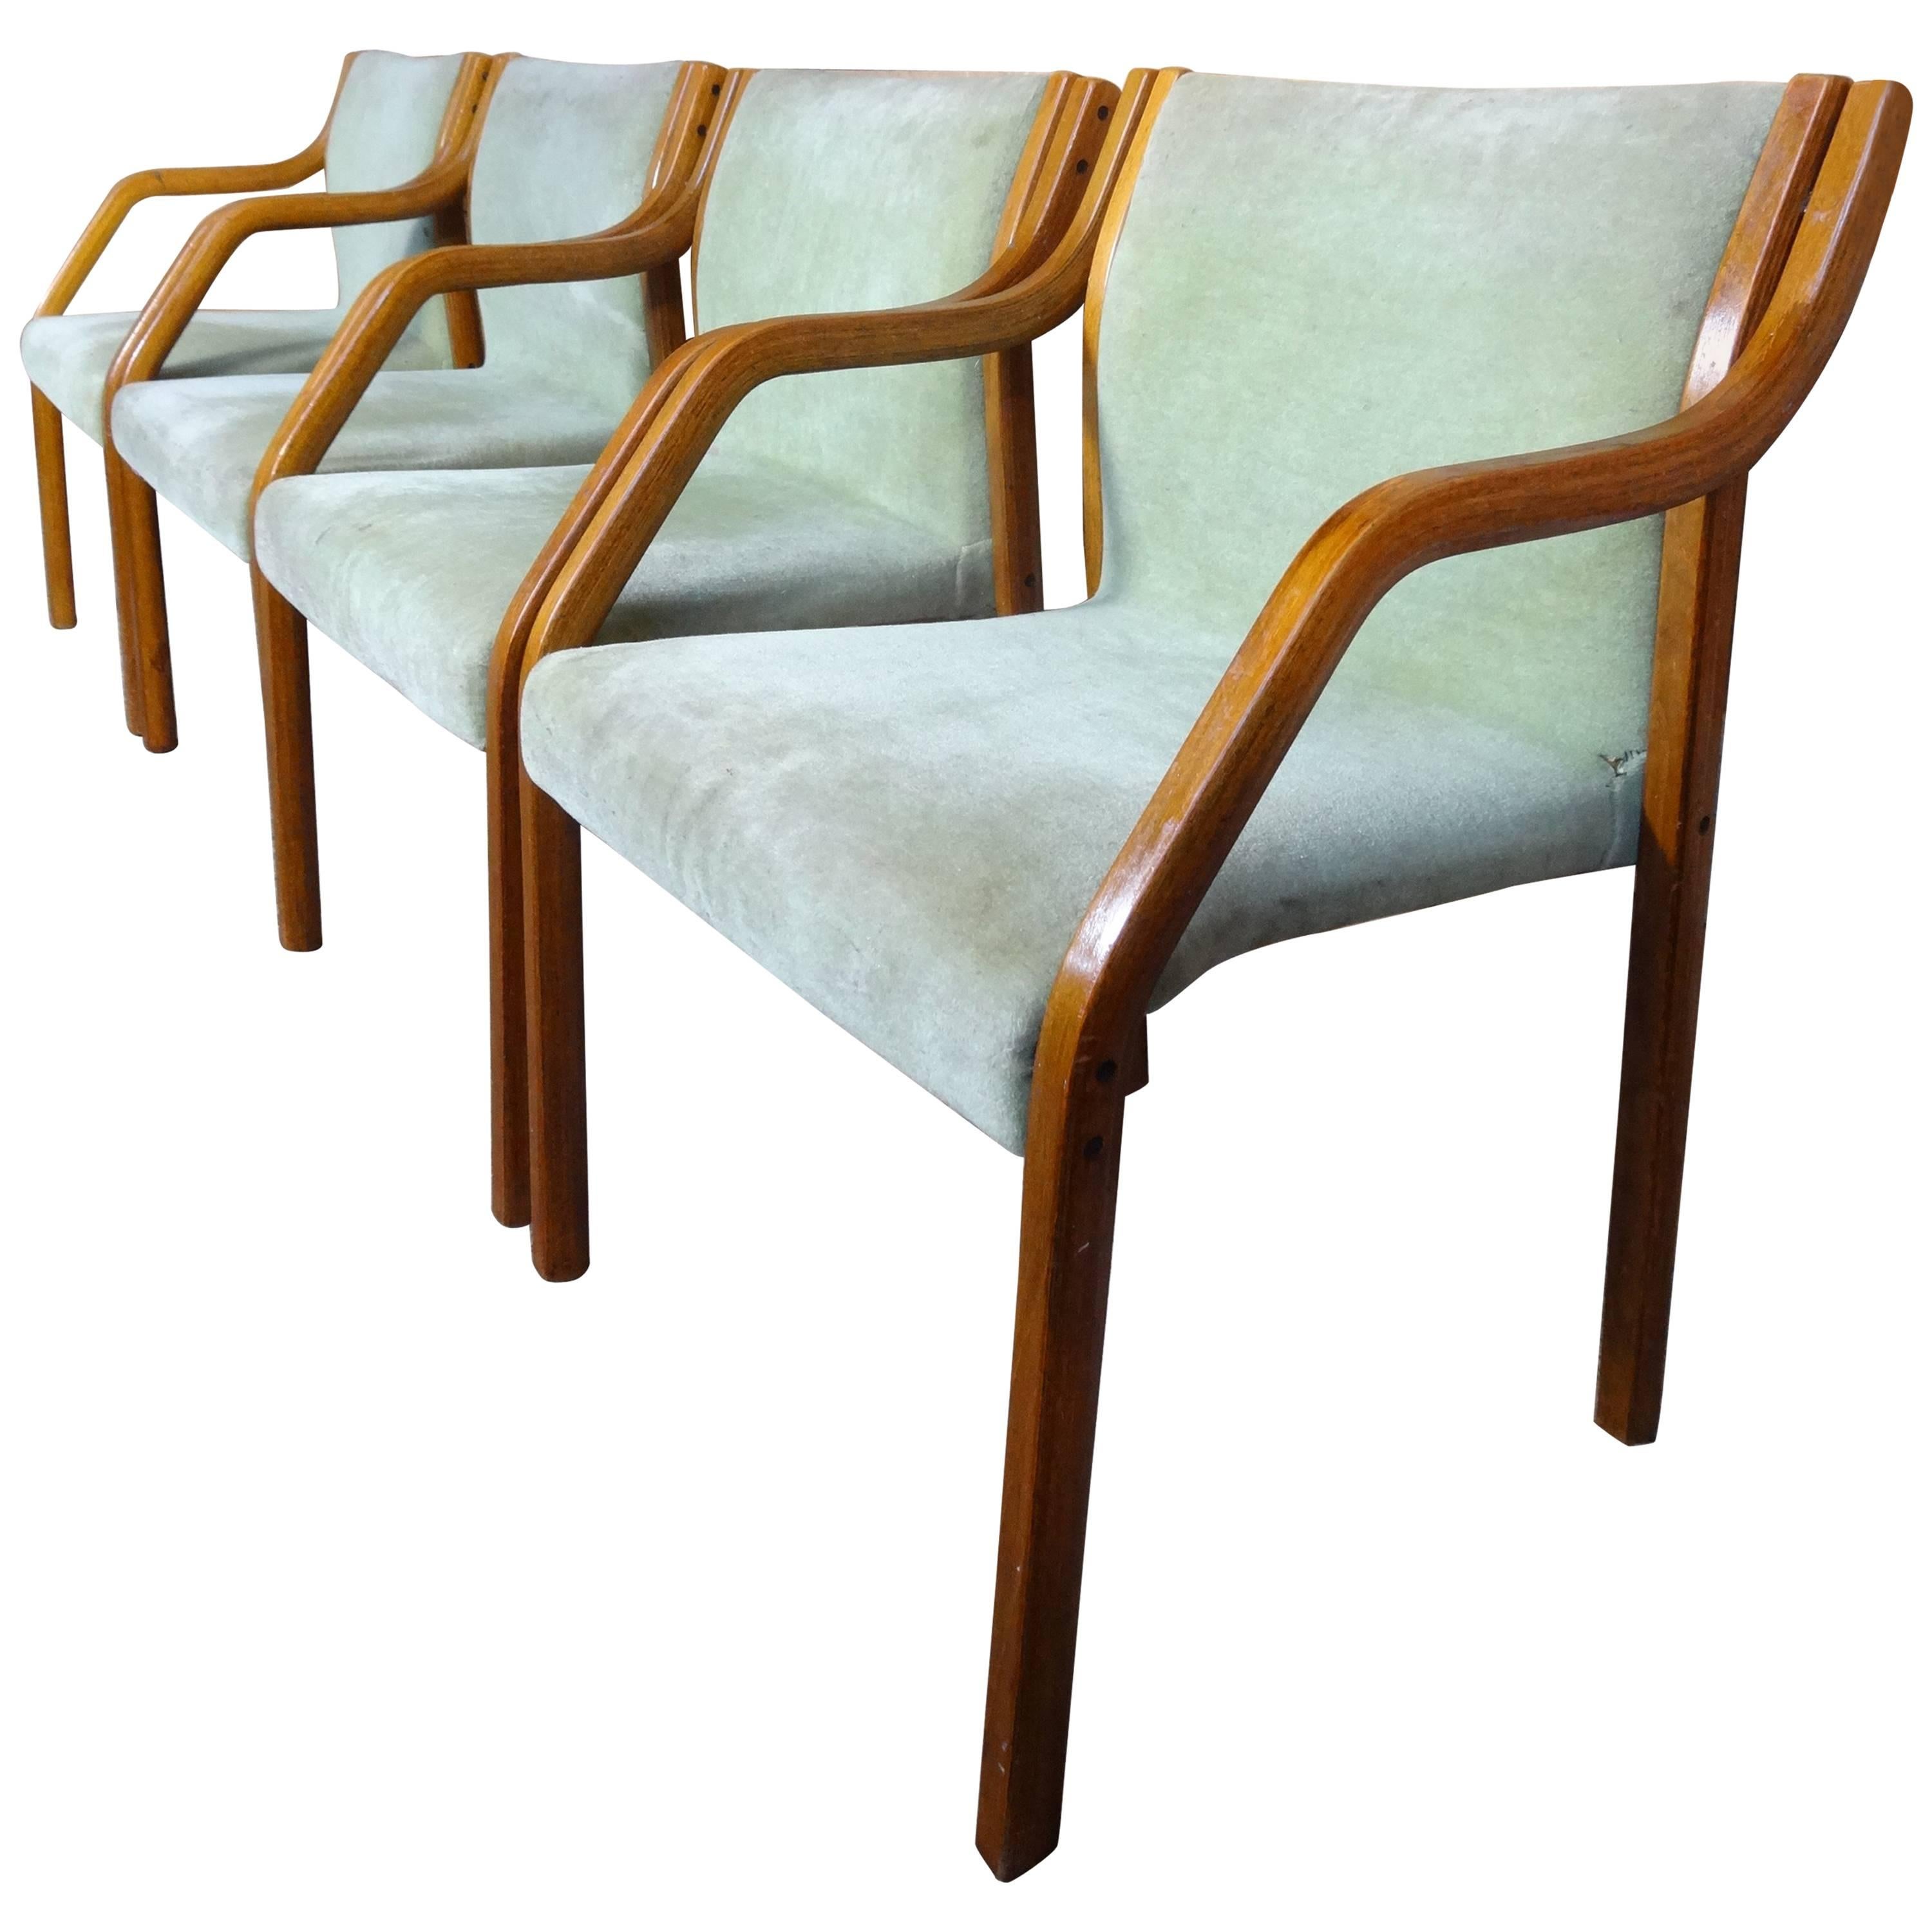 Four early 1970s dining chairs in the style of Preben Fabricius / Knoll.